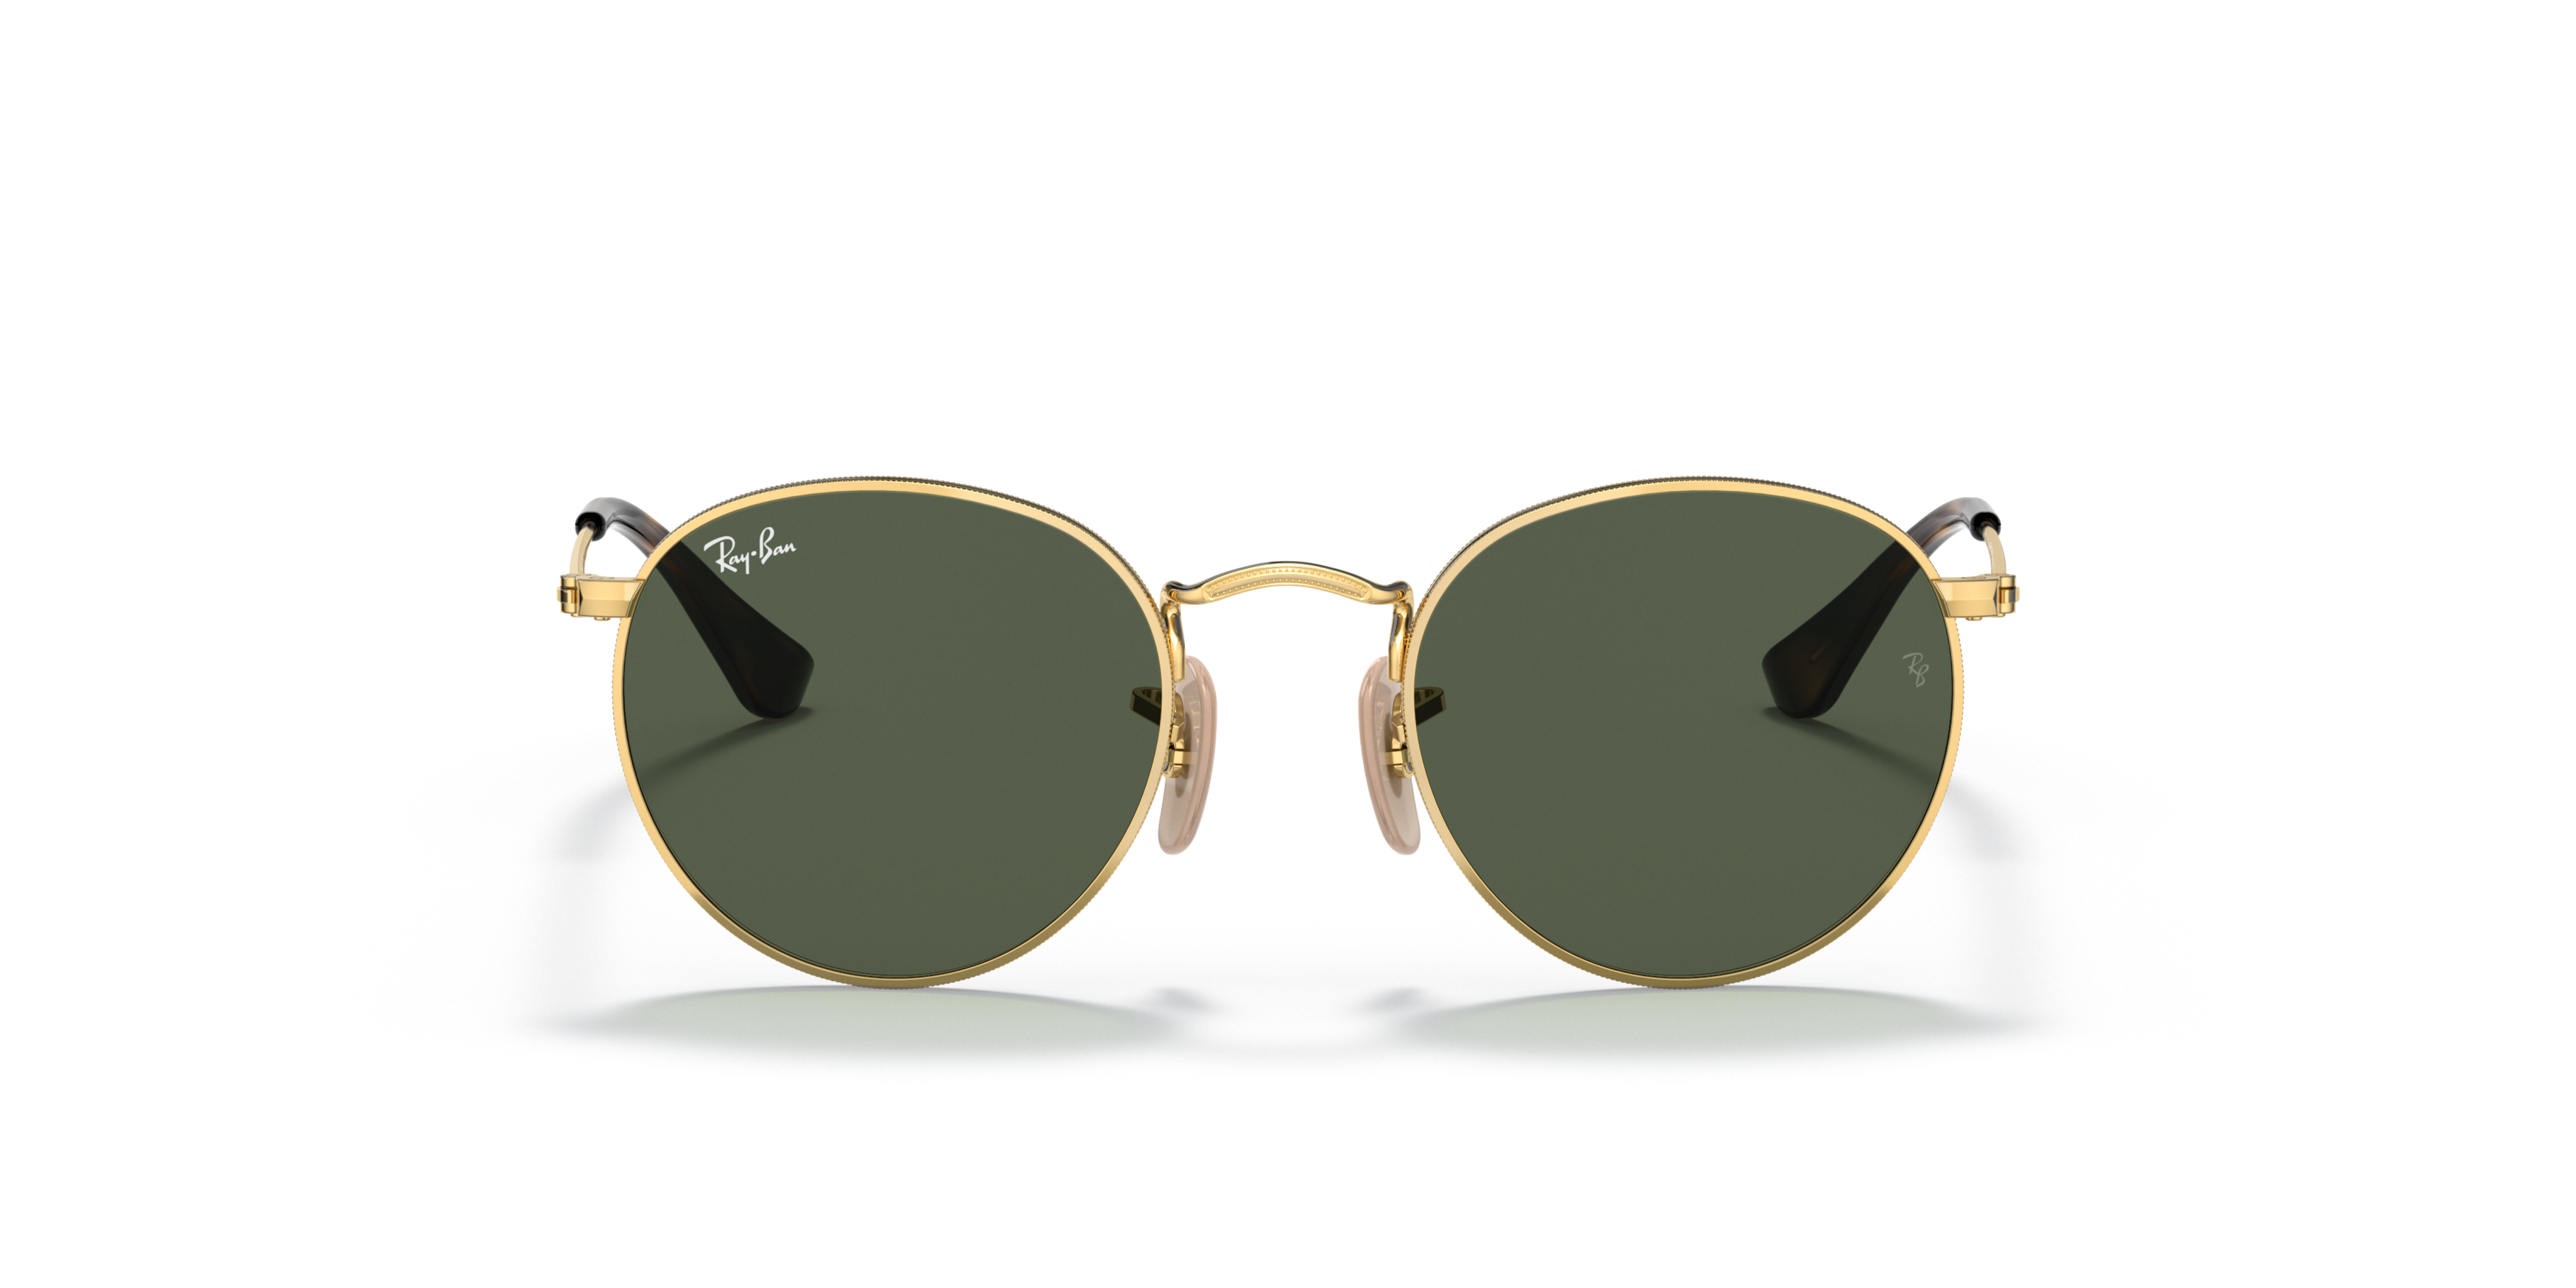 [products.image.front] Ray Ban Junior Round 0RJ9547S 223/71